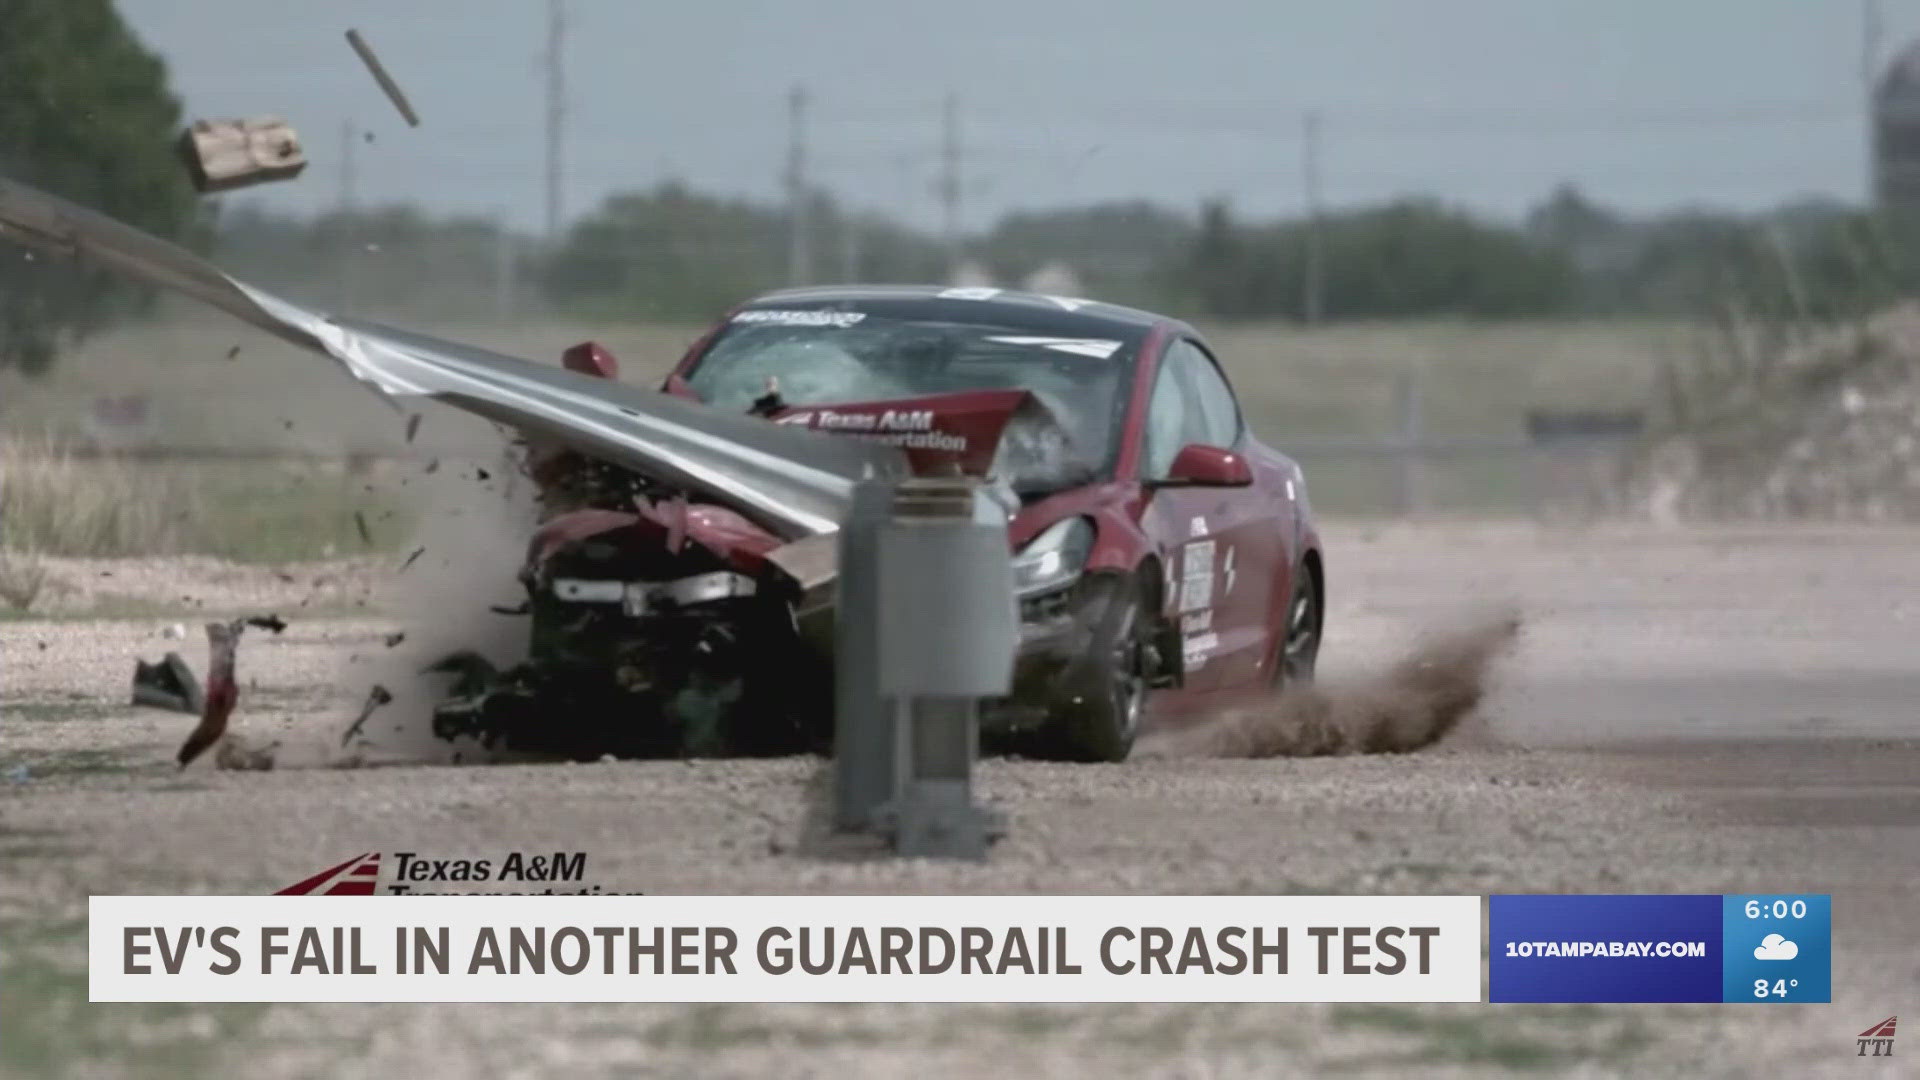 This is the third test that’s been conducted showing guardrails can’t handle EVs.